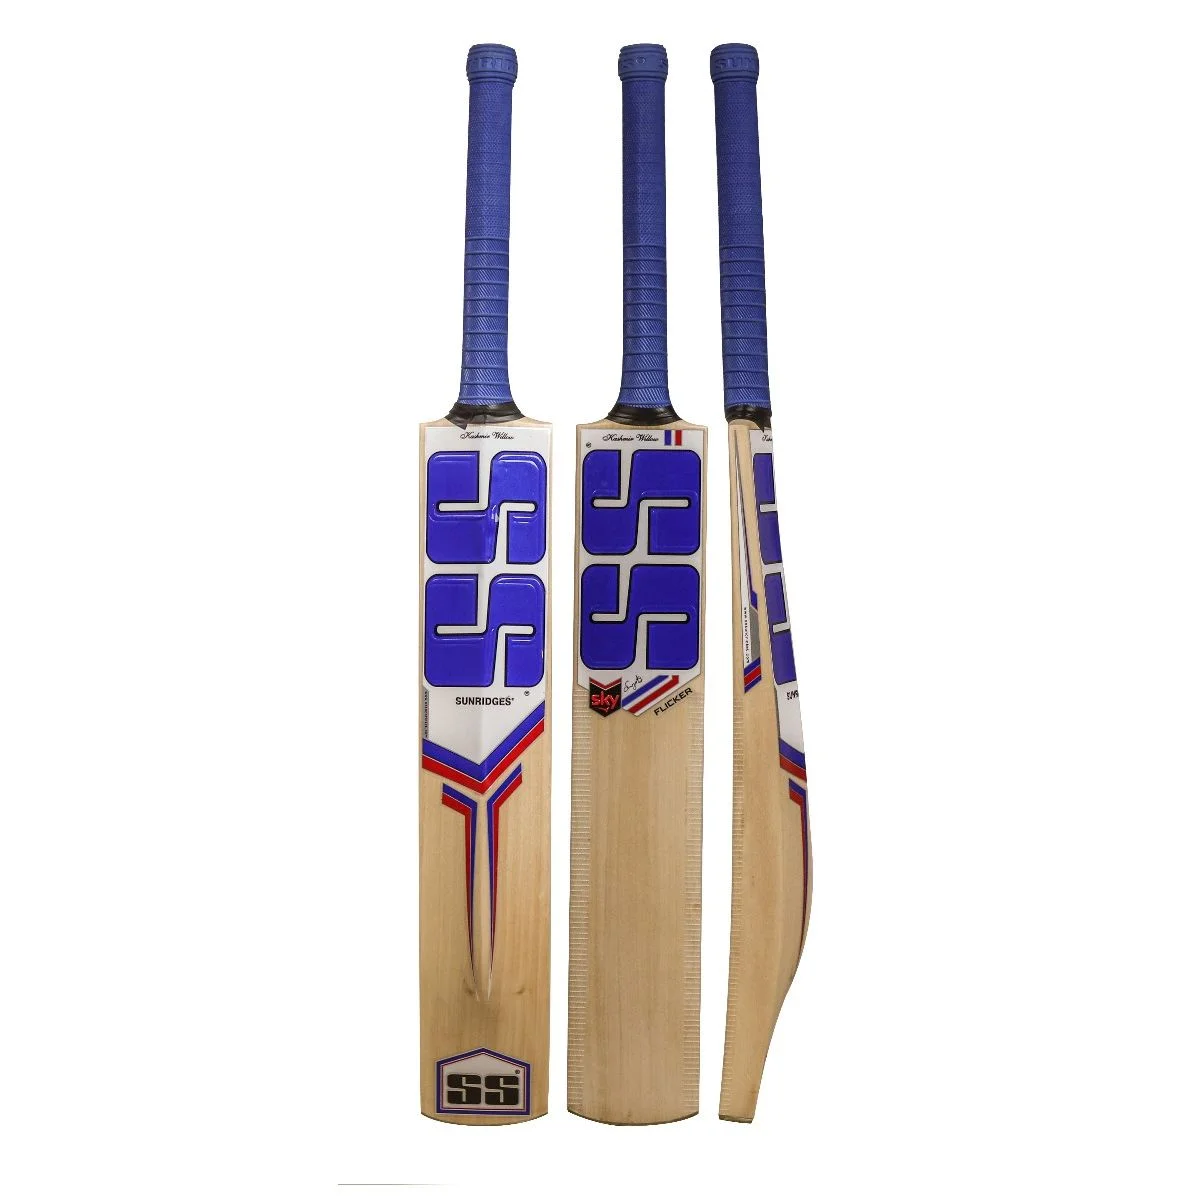 Stunning Good Looking Cricket Bat For Playing